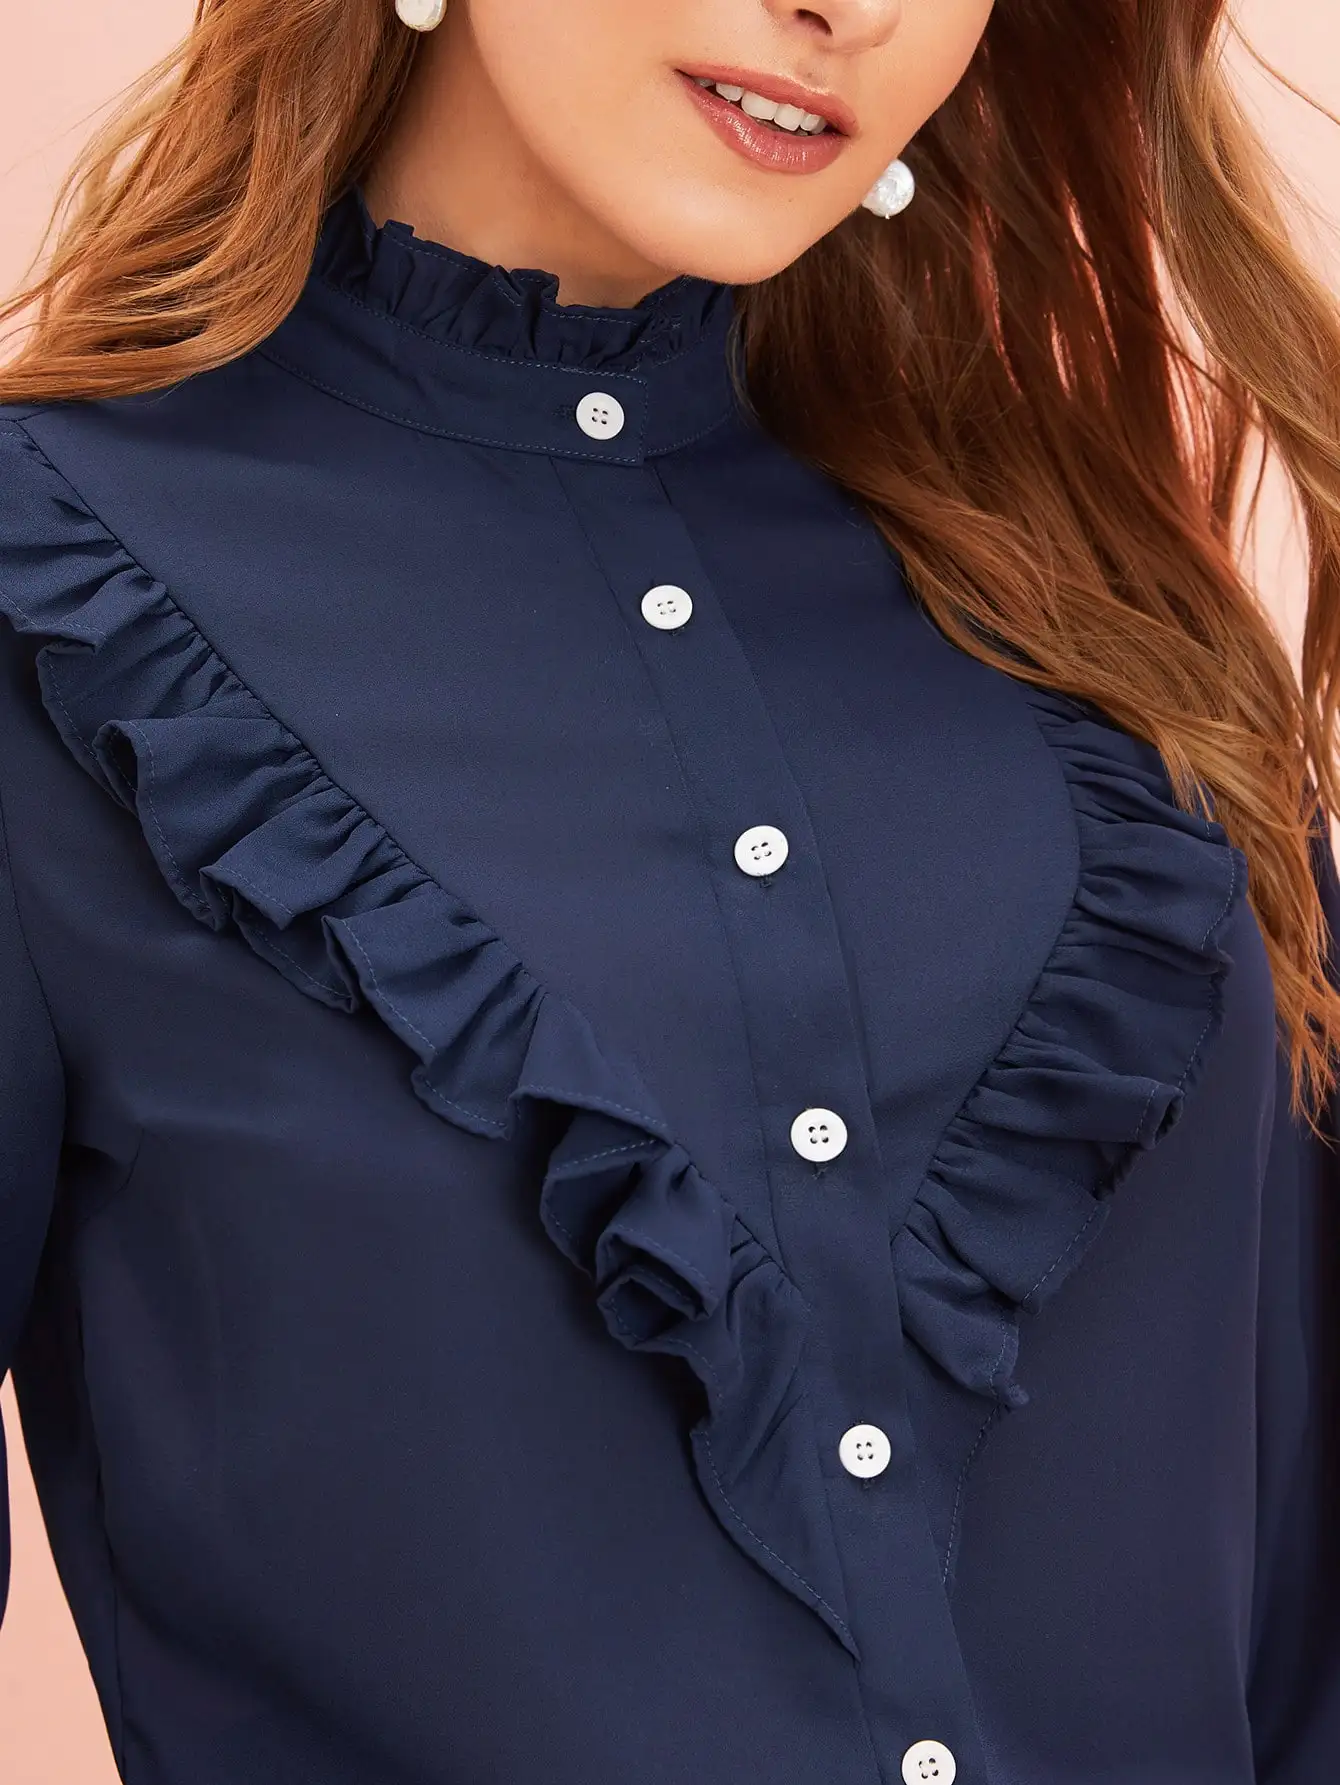 Shirts For Women Blouses Lady Long Sleeve Button Down Fall Tops Crew Neck Office Lady Chiffon Korean Fashion Clothes Wholesale